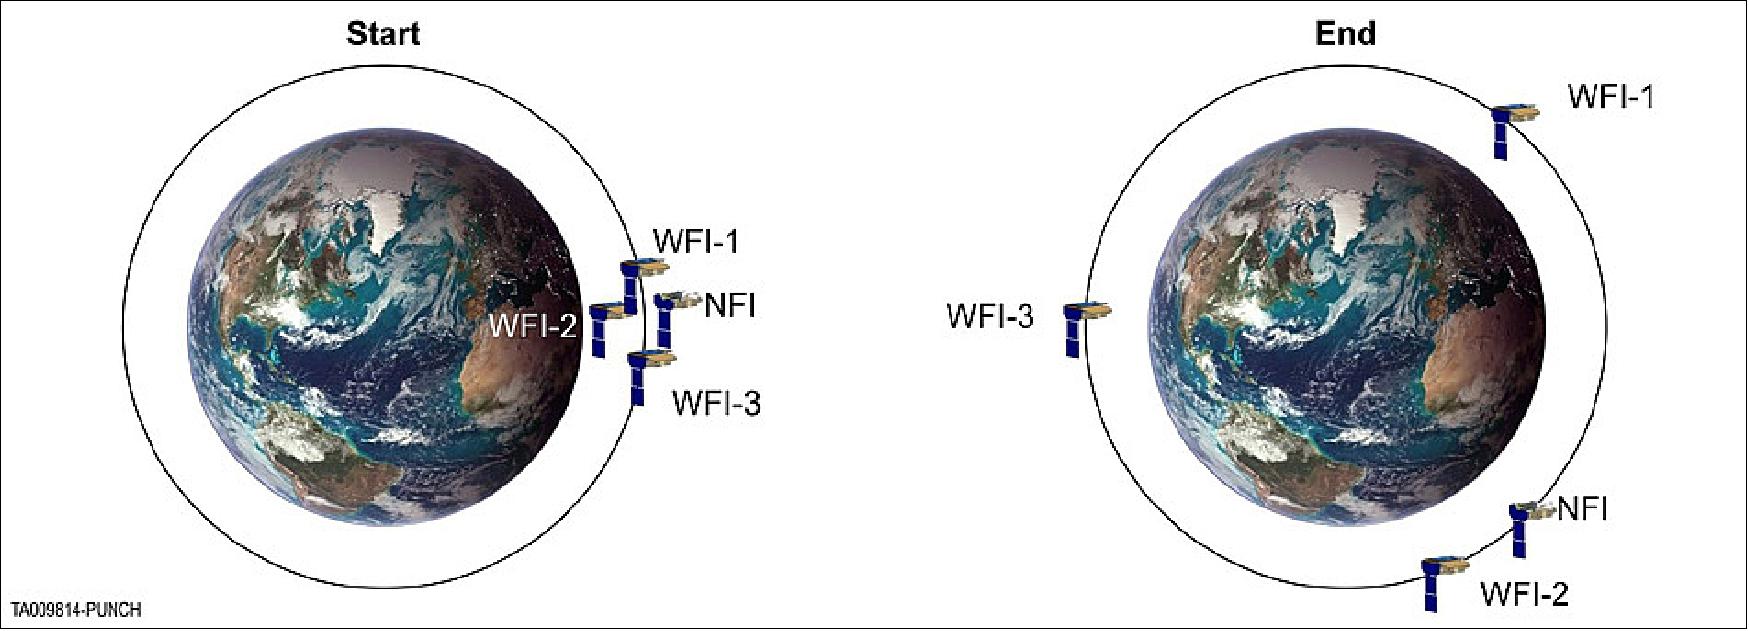 Figure 19: Early mission operations, establishing equal WFI observatory orbital spacing (image credit: PUNCH Team)